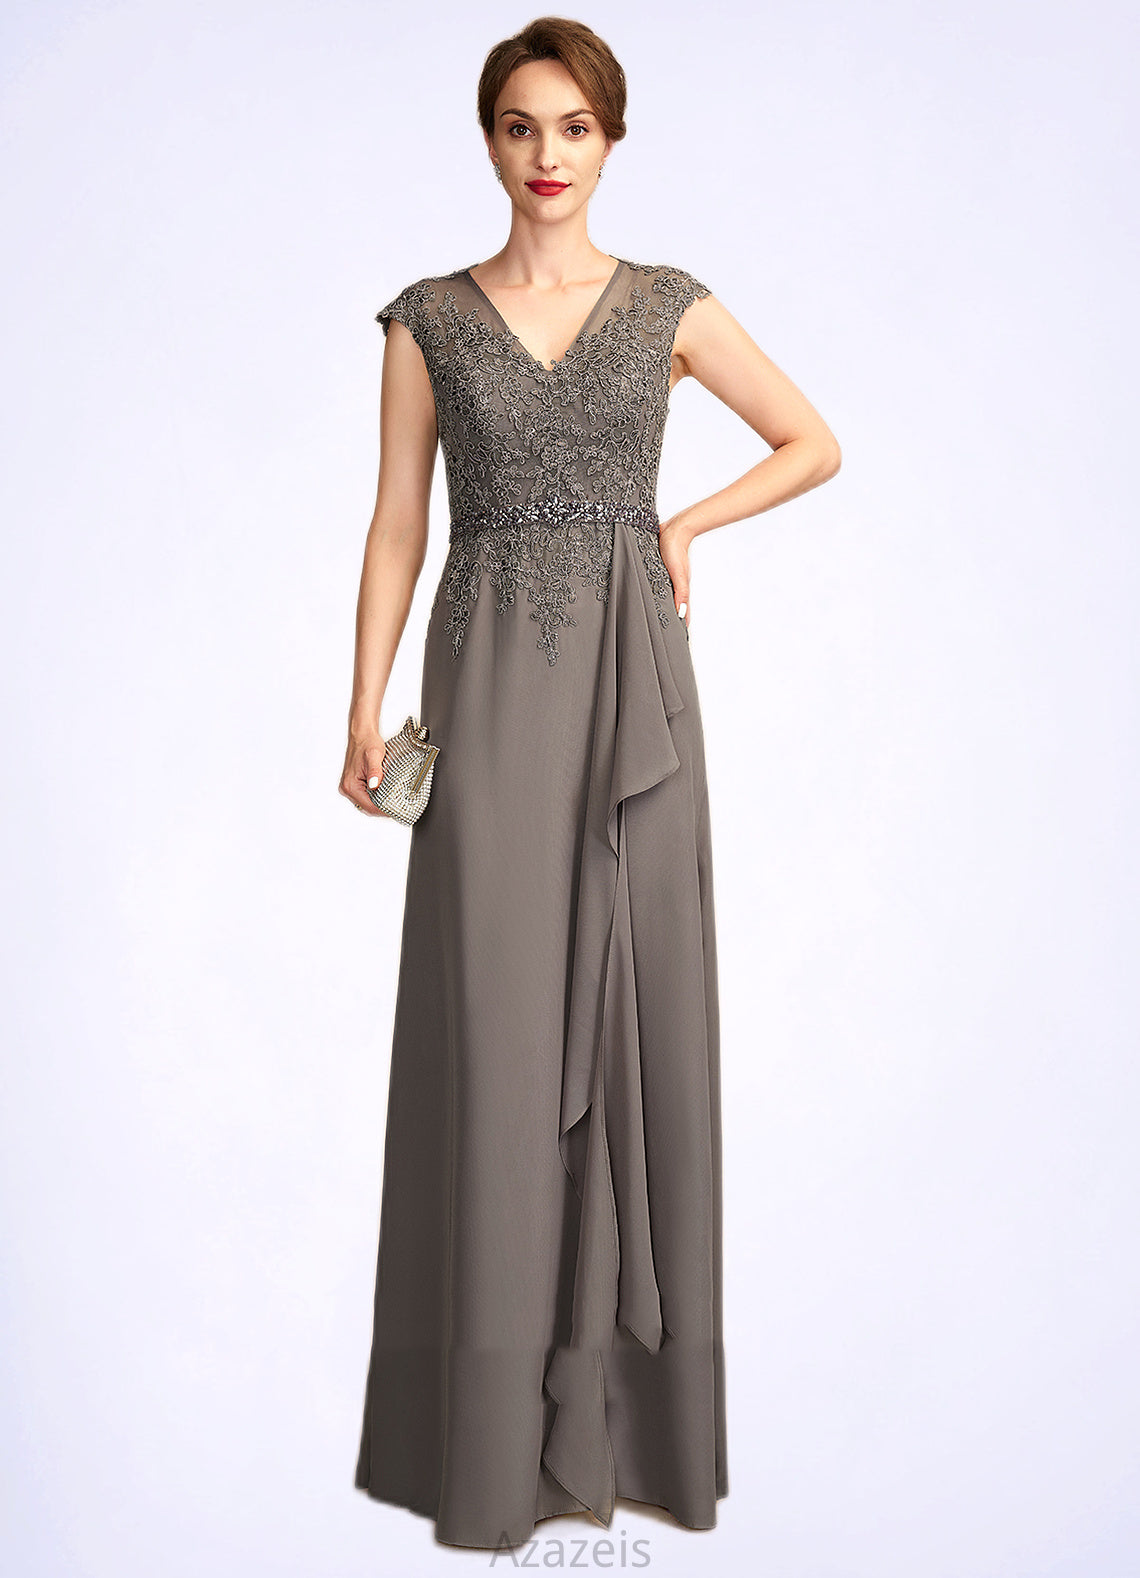 Ruby A-Line V-neck Floor-Length Chiffon Lace Mother of the Bride Dress With Beading Sequins Cascading Ruffles DF126P0015030